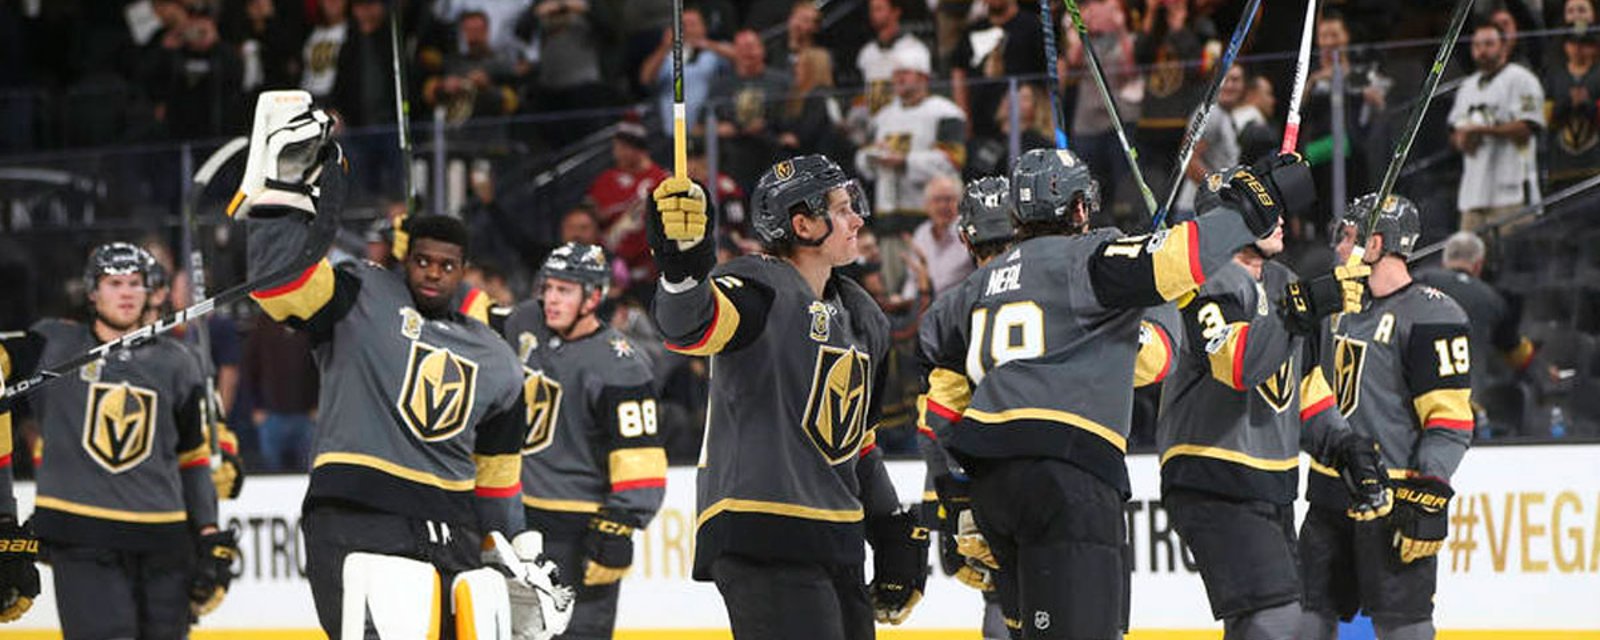 Breaking: Golden Knights already more valuable than 3 Canadian teams